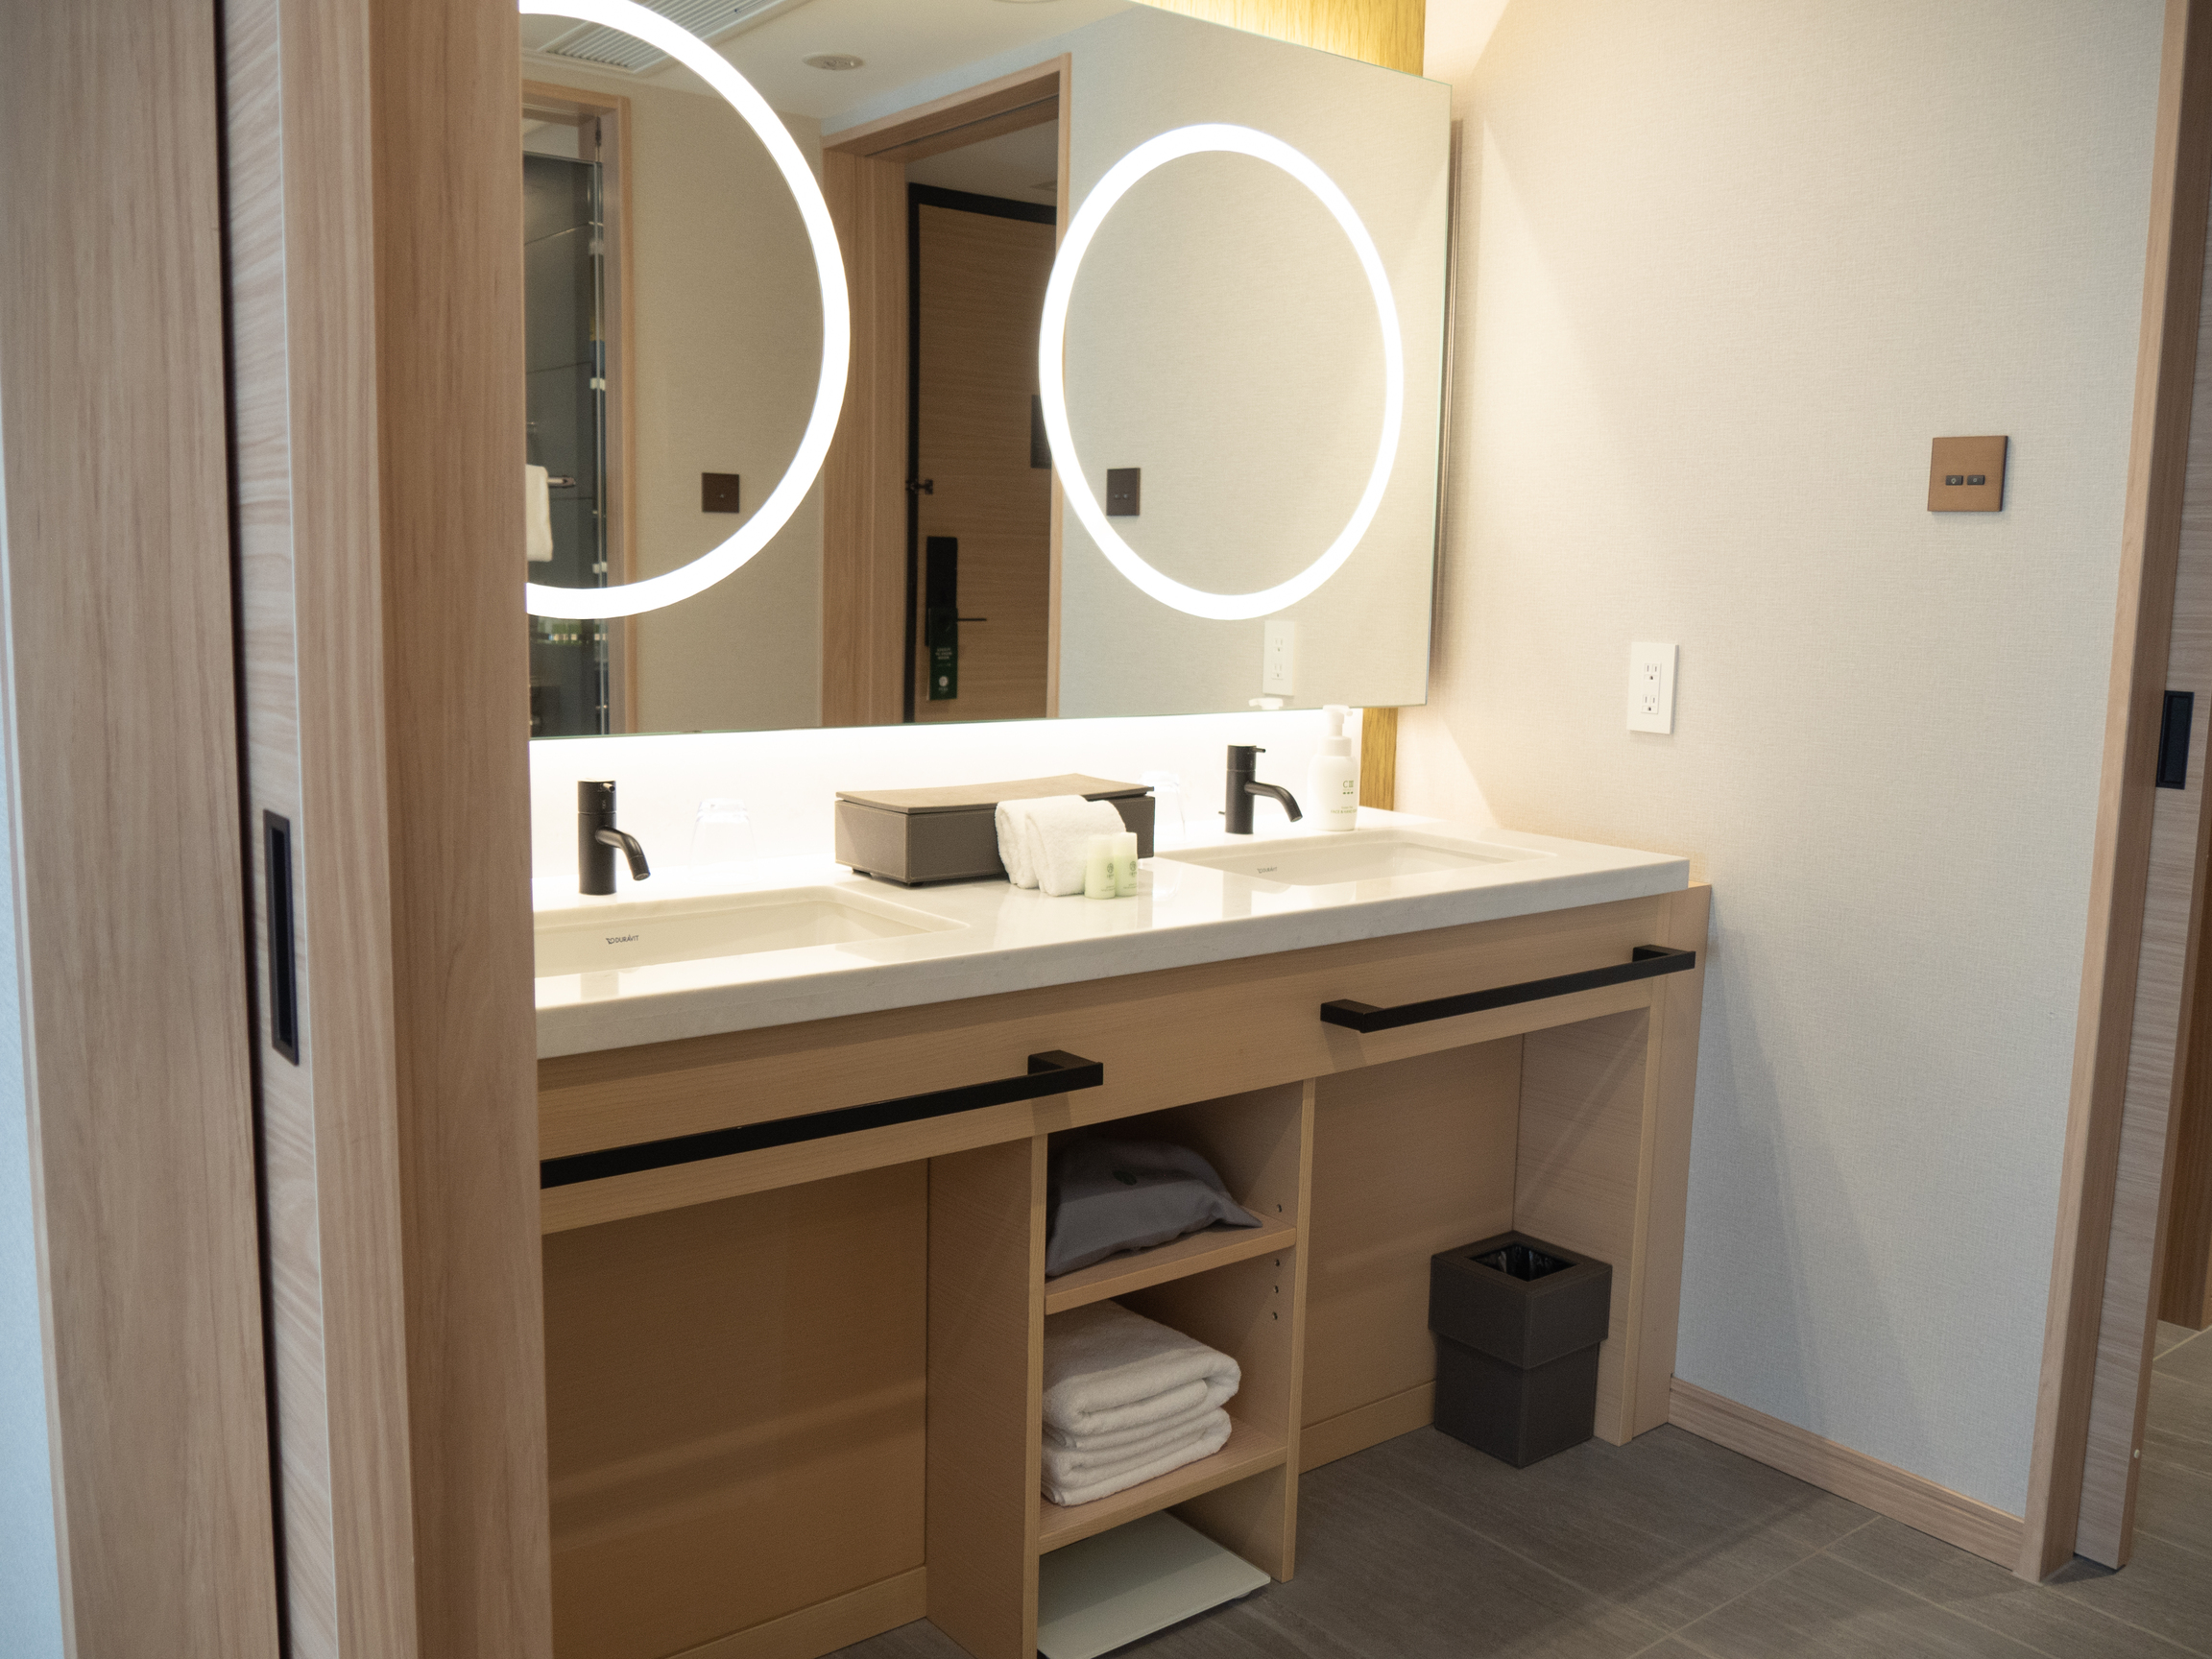 There’s plenty of room to get ready with this large mirror and two sinks